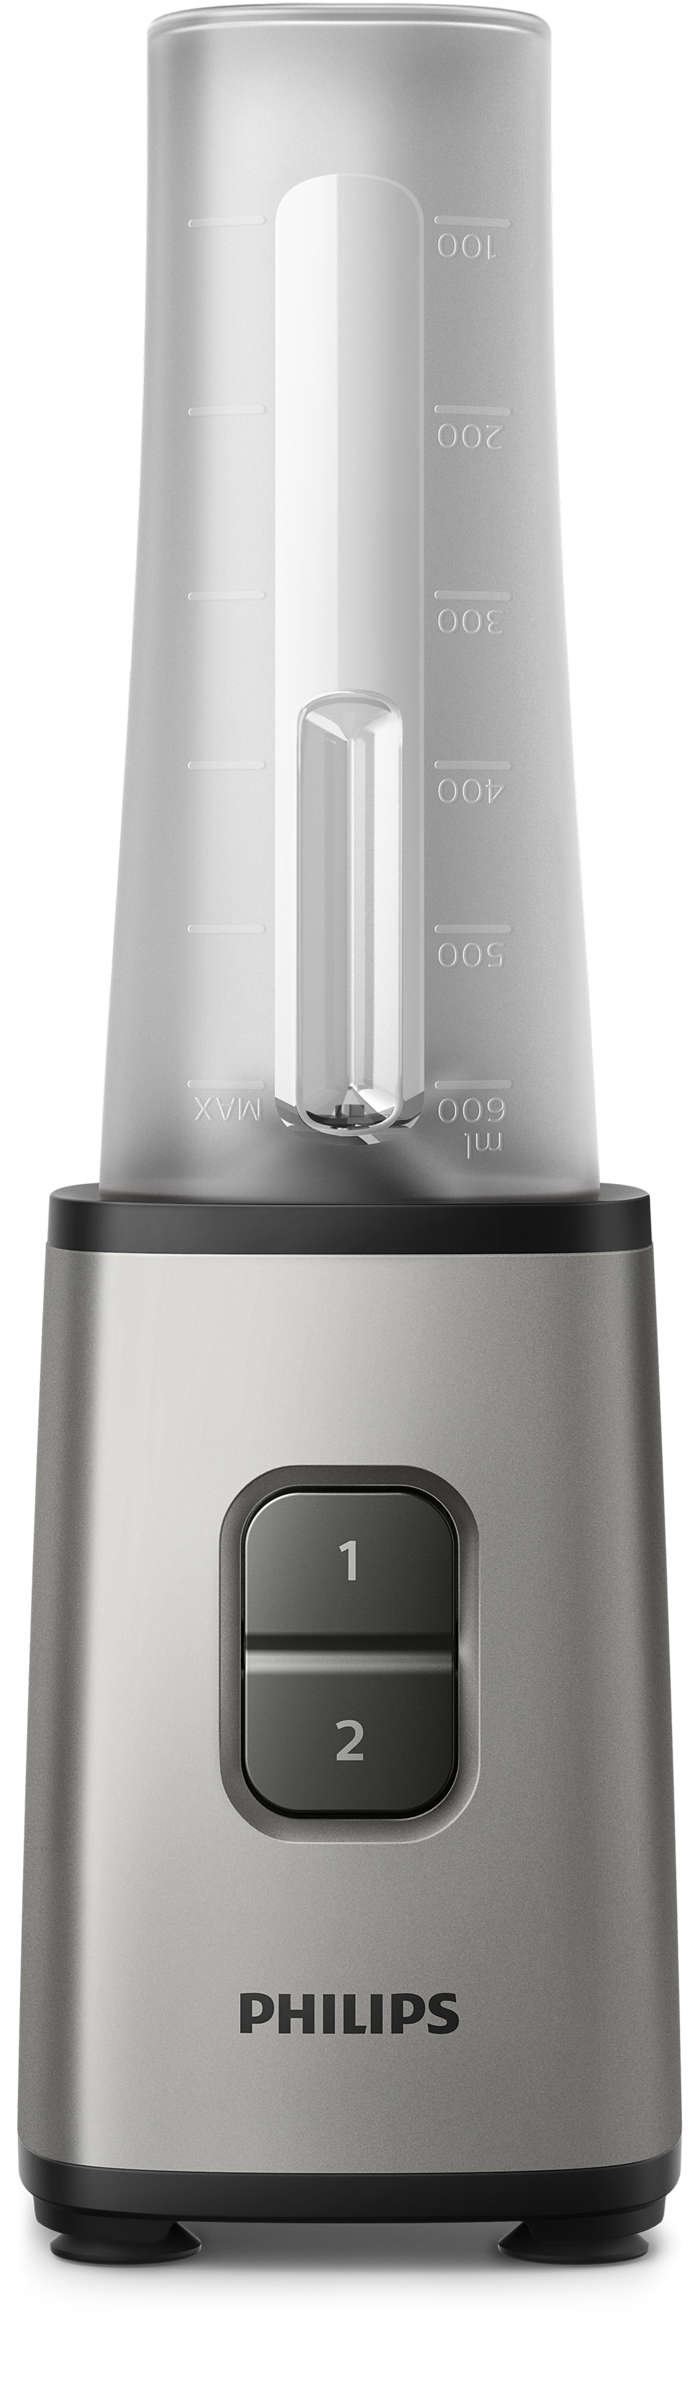 Блендер Philips HR2600/80 Silver блендер philips daily collection hr2100 00